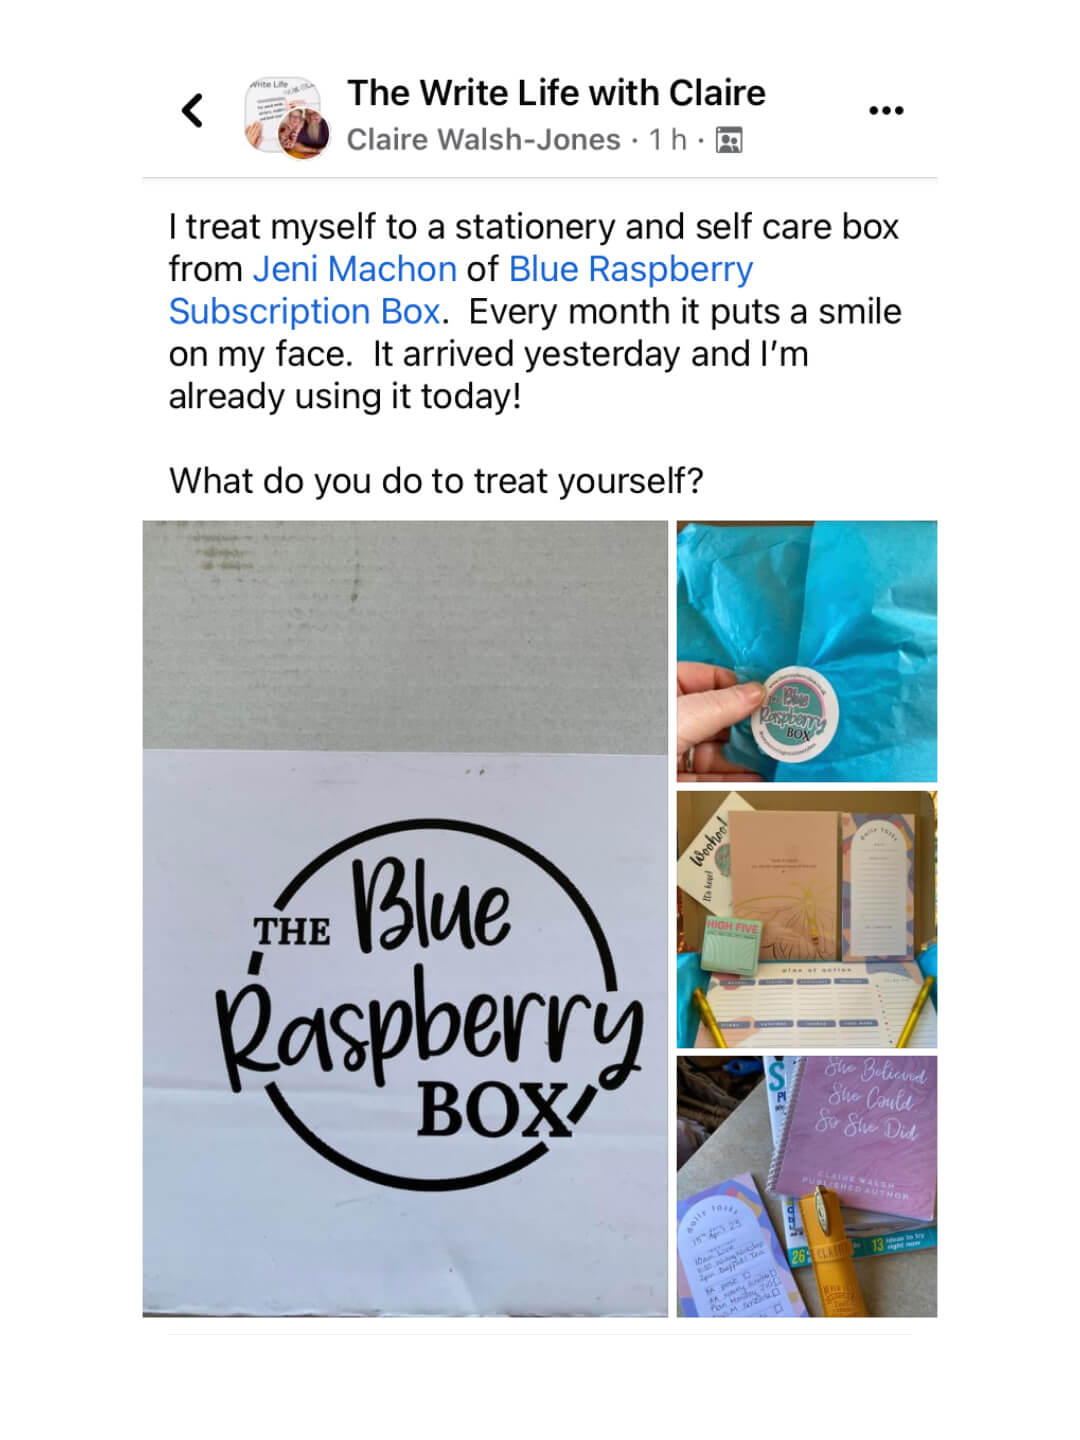 Screenshot of customer review. Three photographs of the box and stationery items.